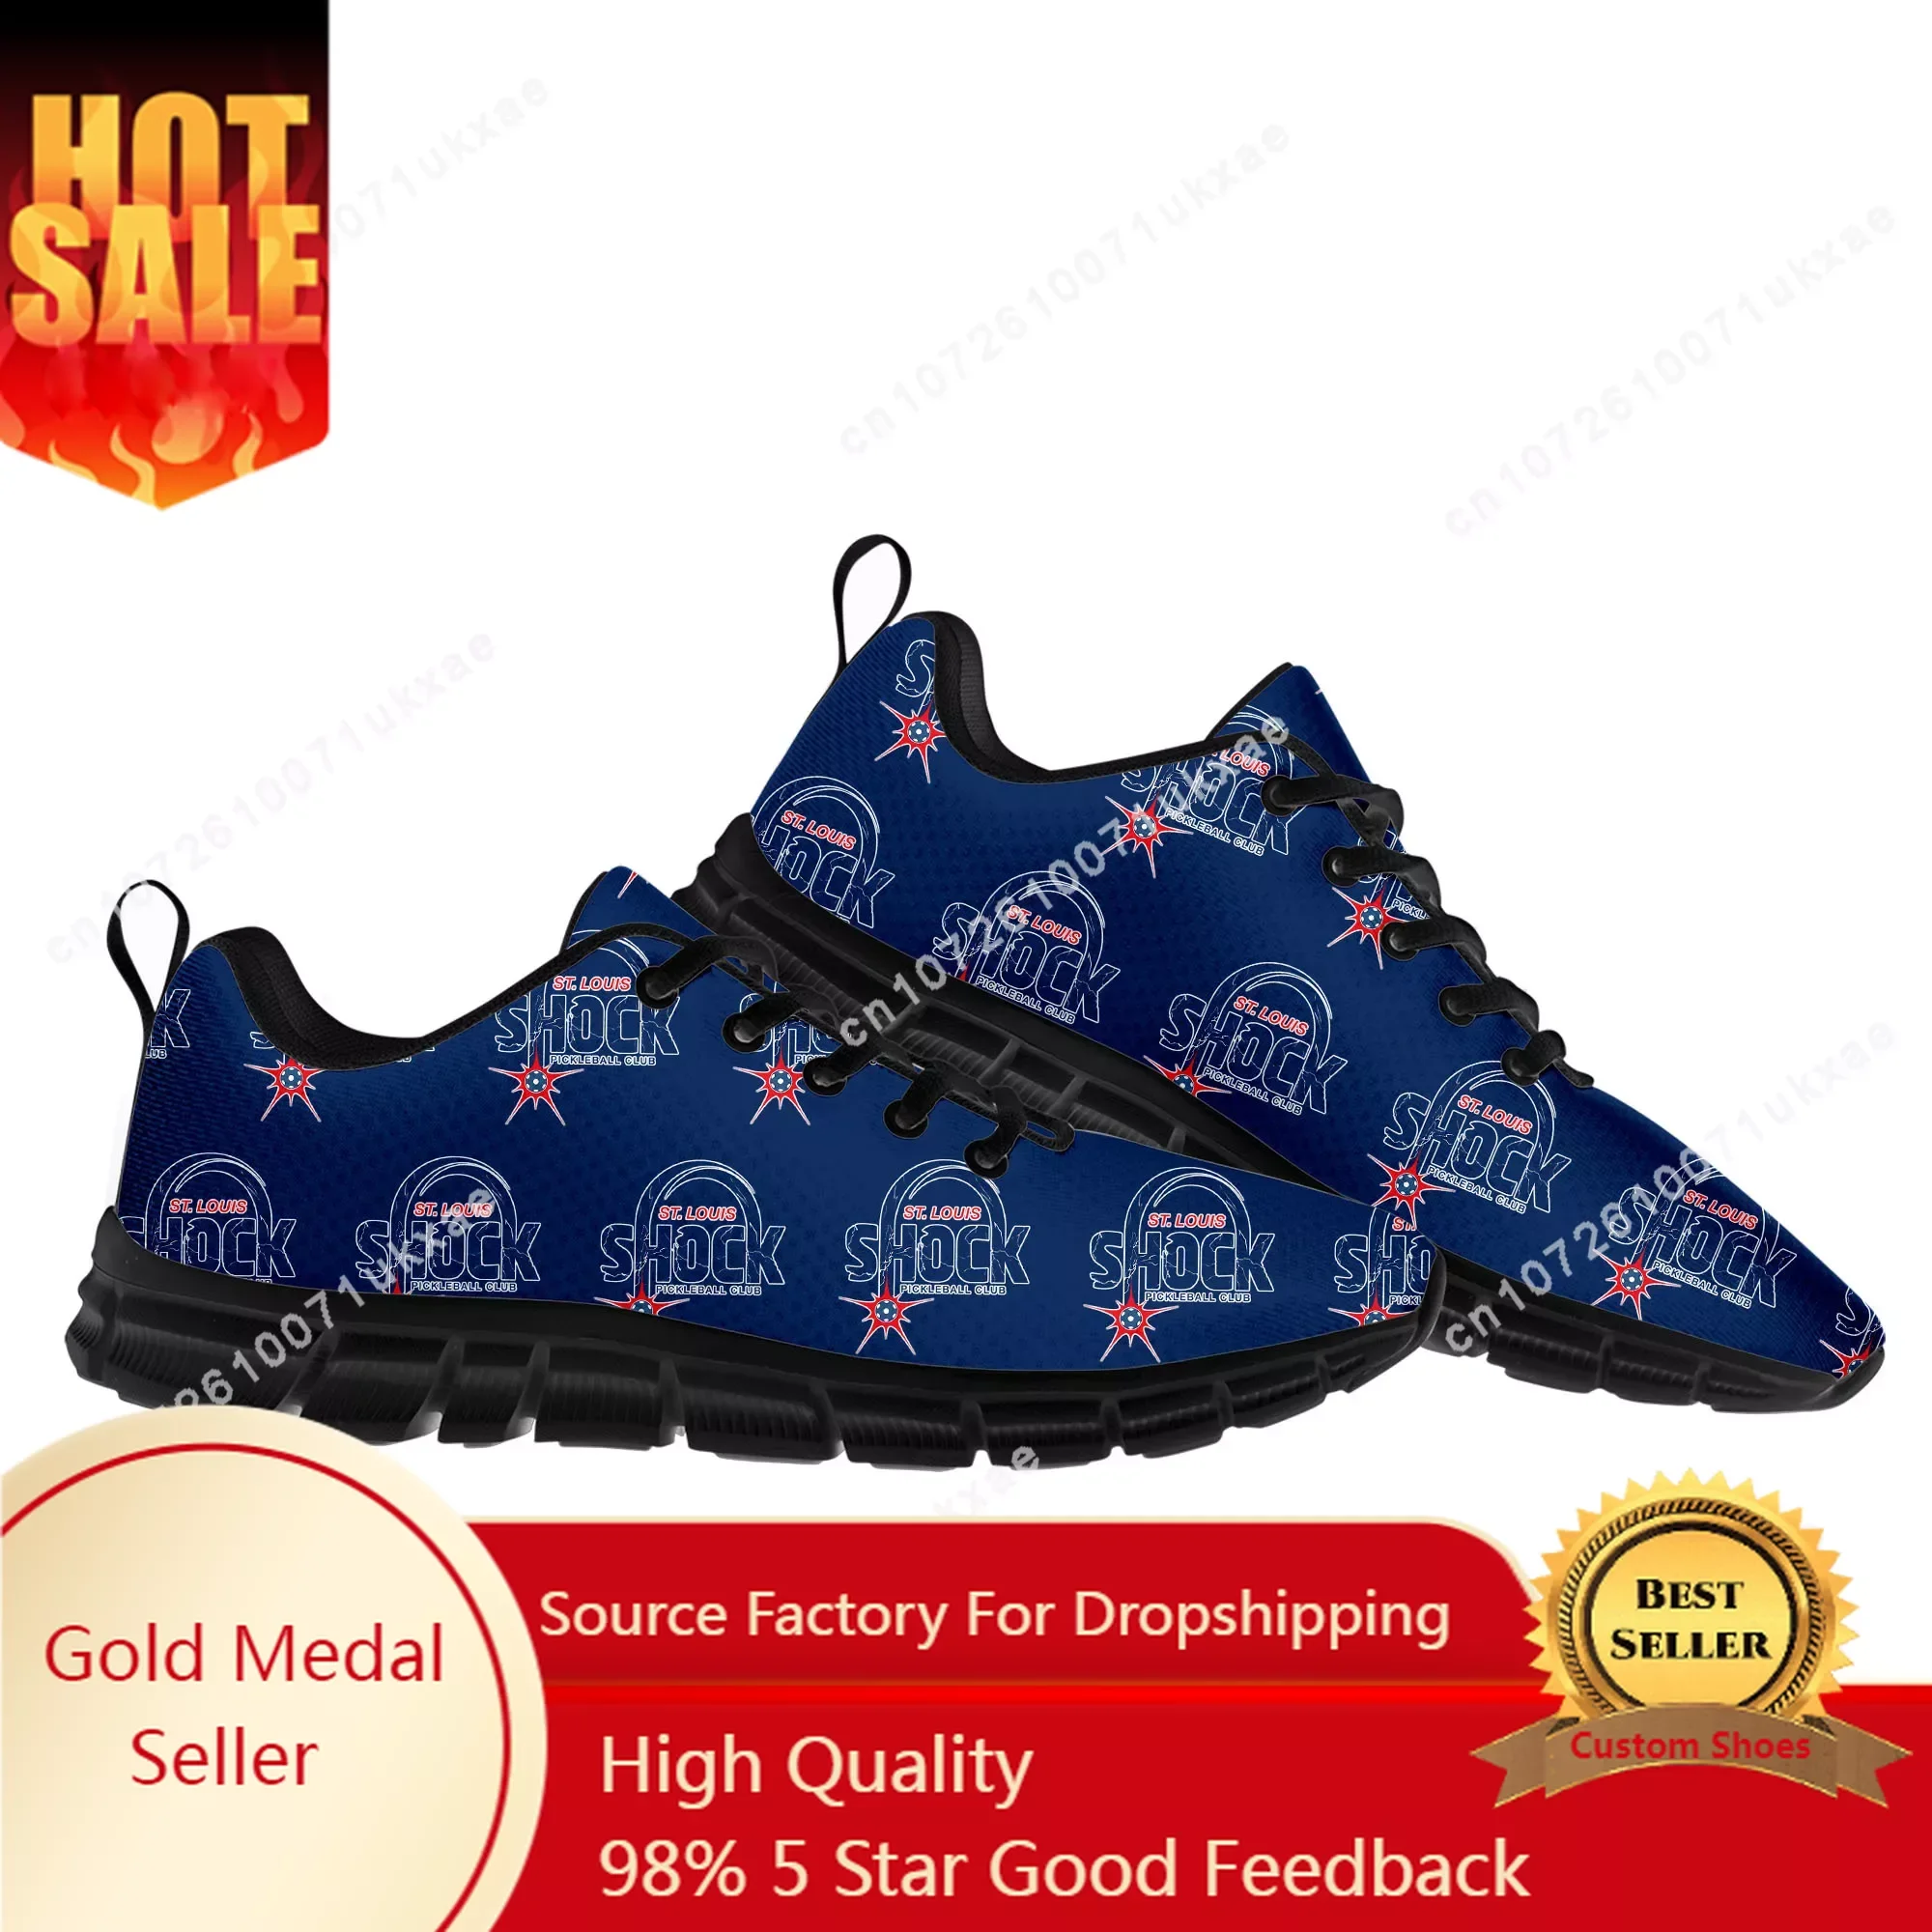 SHOCK pickleball Sports Shoes Mens Womens Teenager Kids Children Sneakers High Quality Parent Child Sneaker Customize DIY Shoe